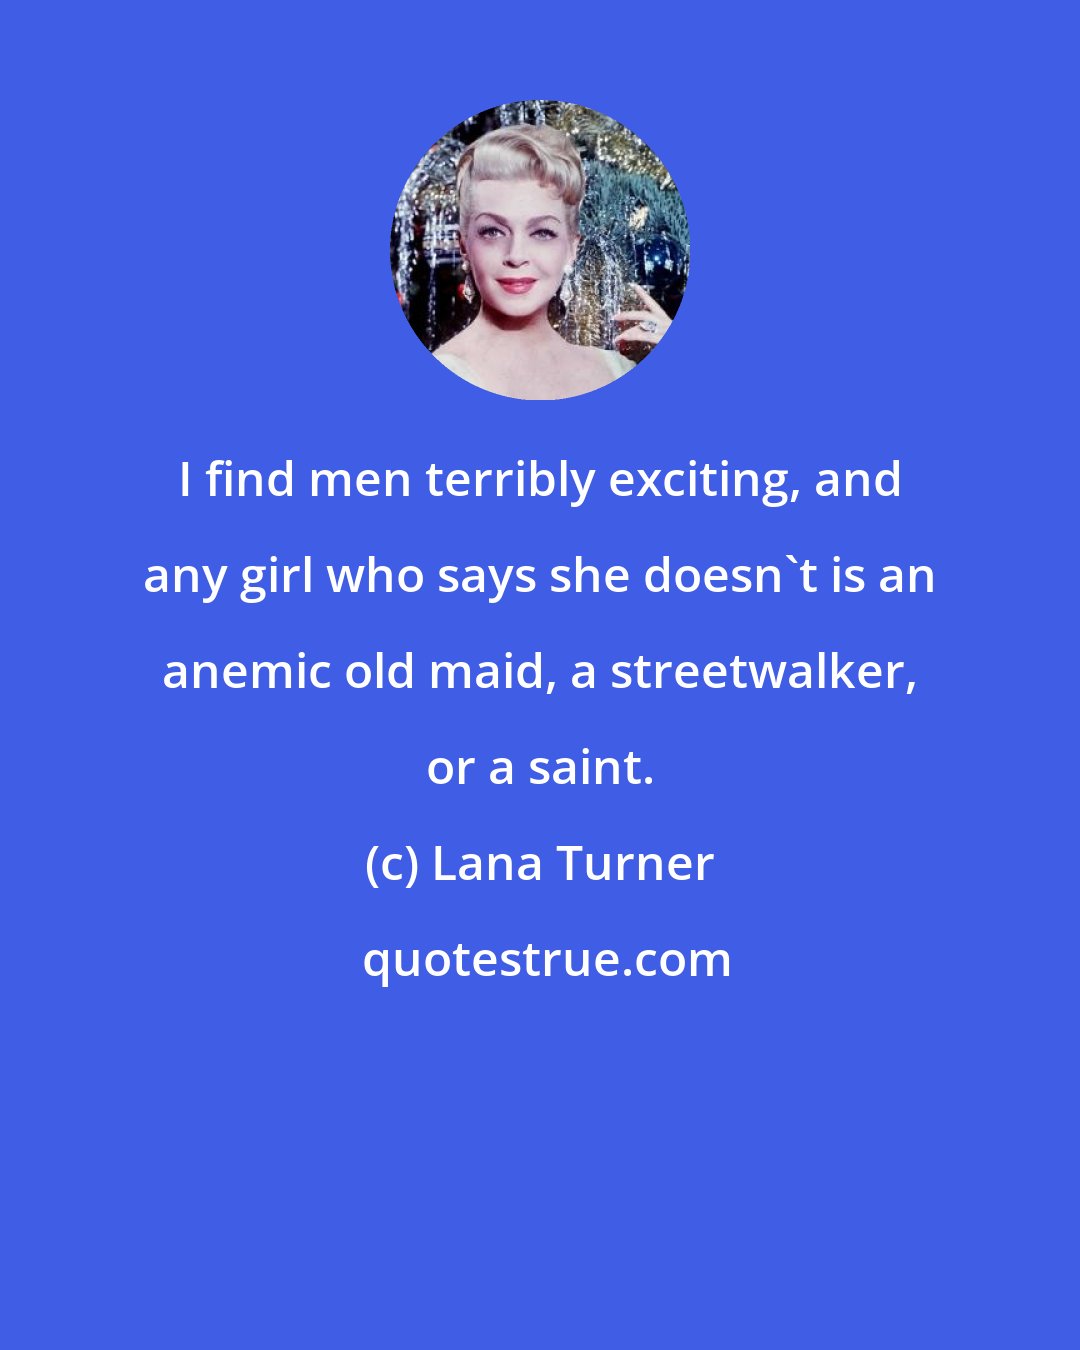 Lana Turner: I find men terribly exciting, and any girl who says she doesn't is an anemic old maid, a streetwalker, or a saint.